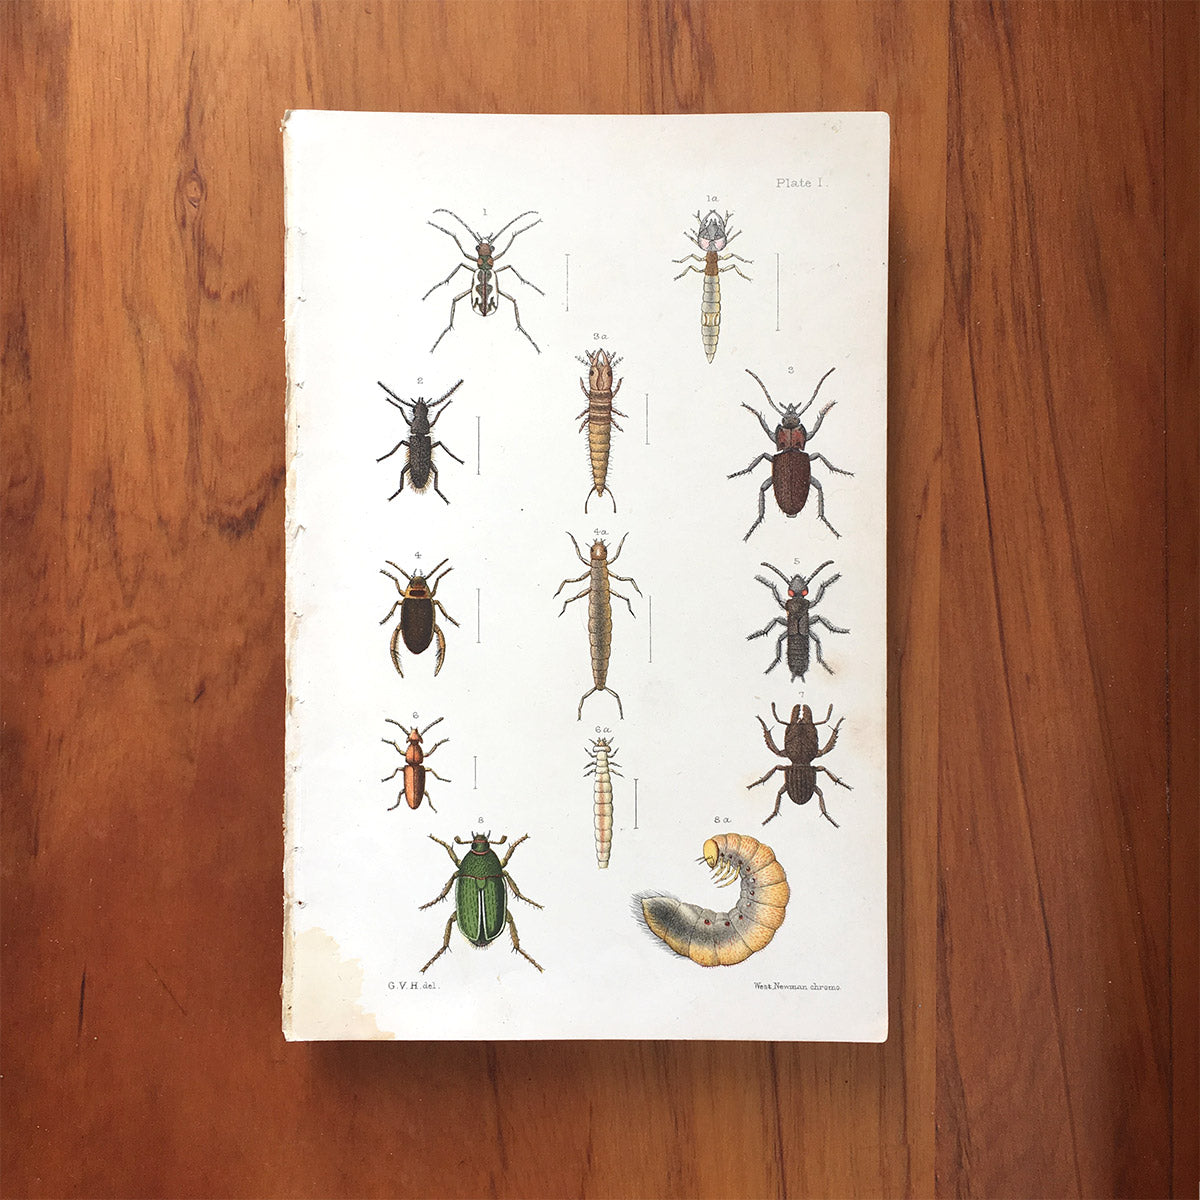 New Zealand insects. Plate I. Coleoptera